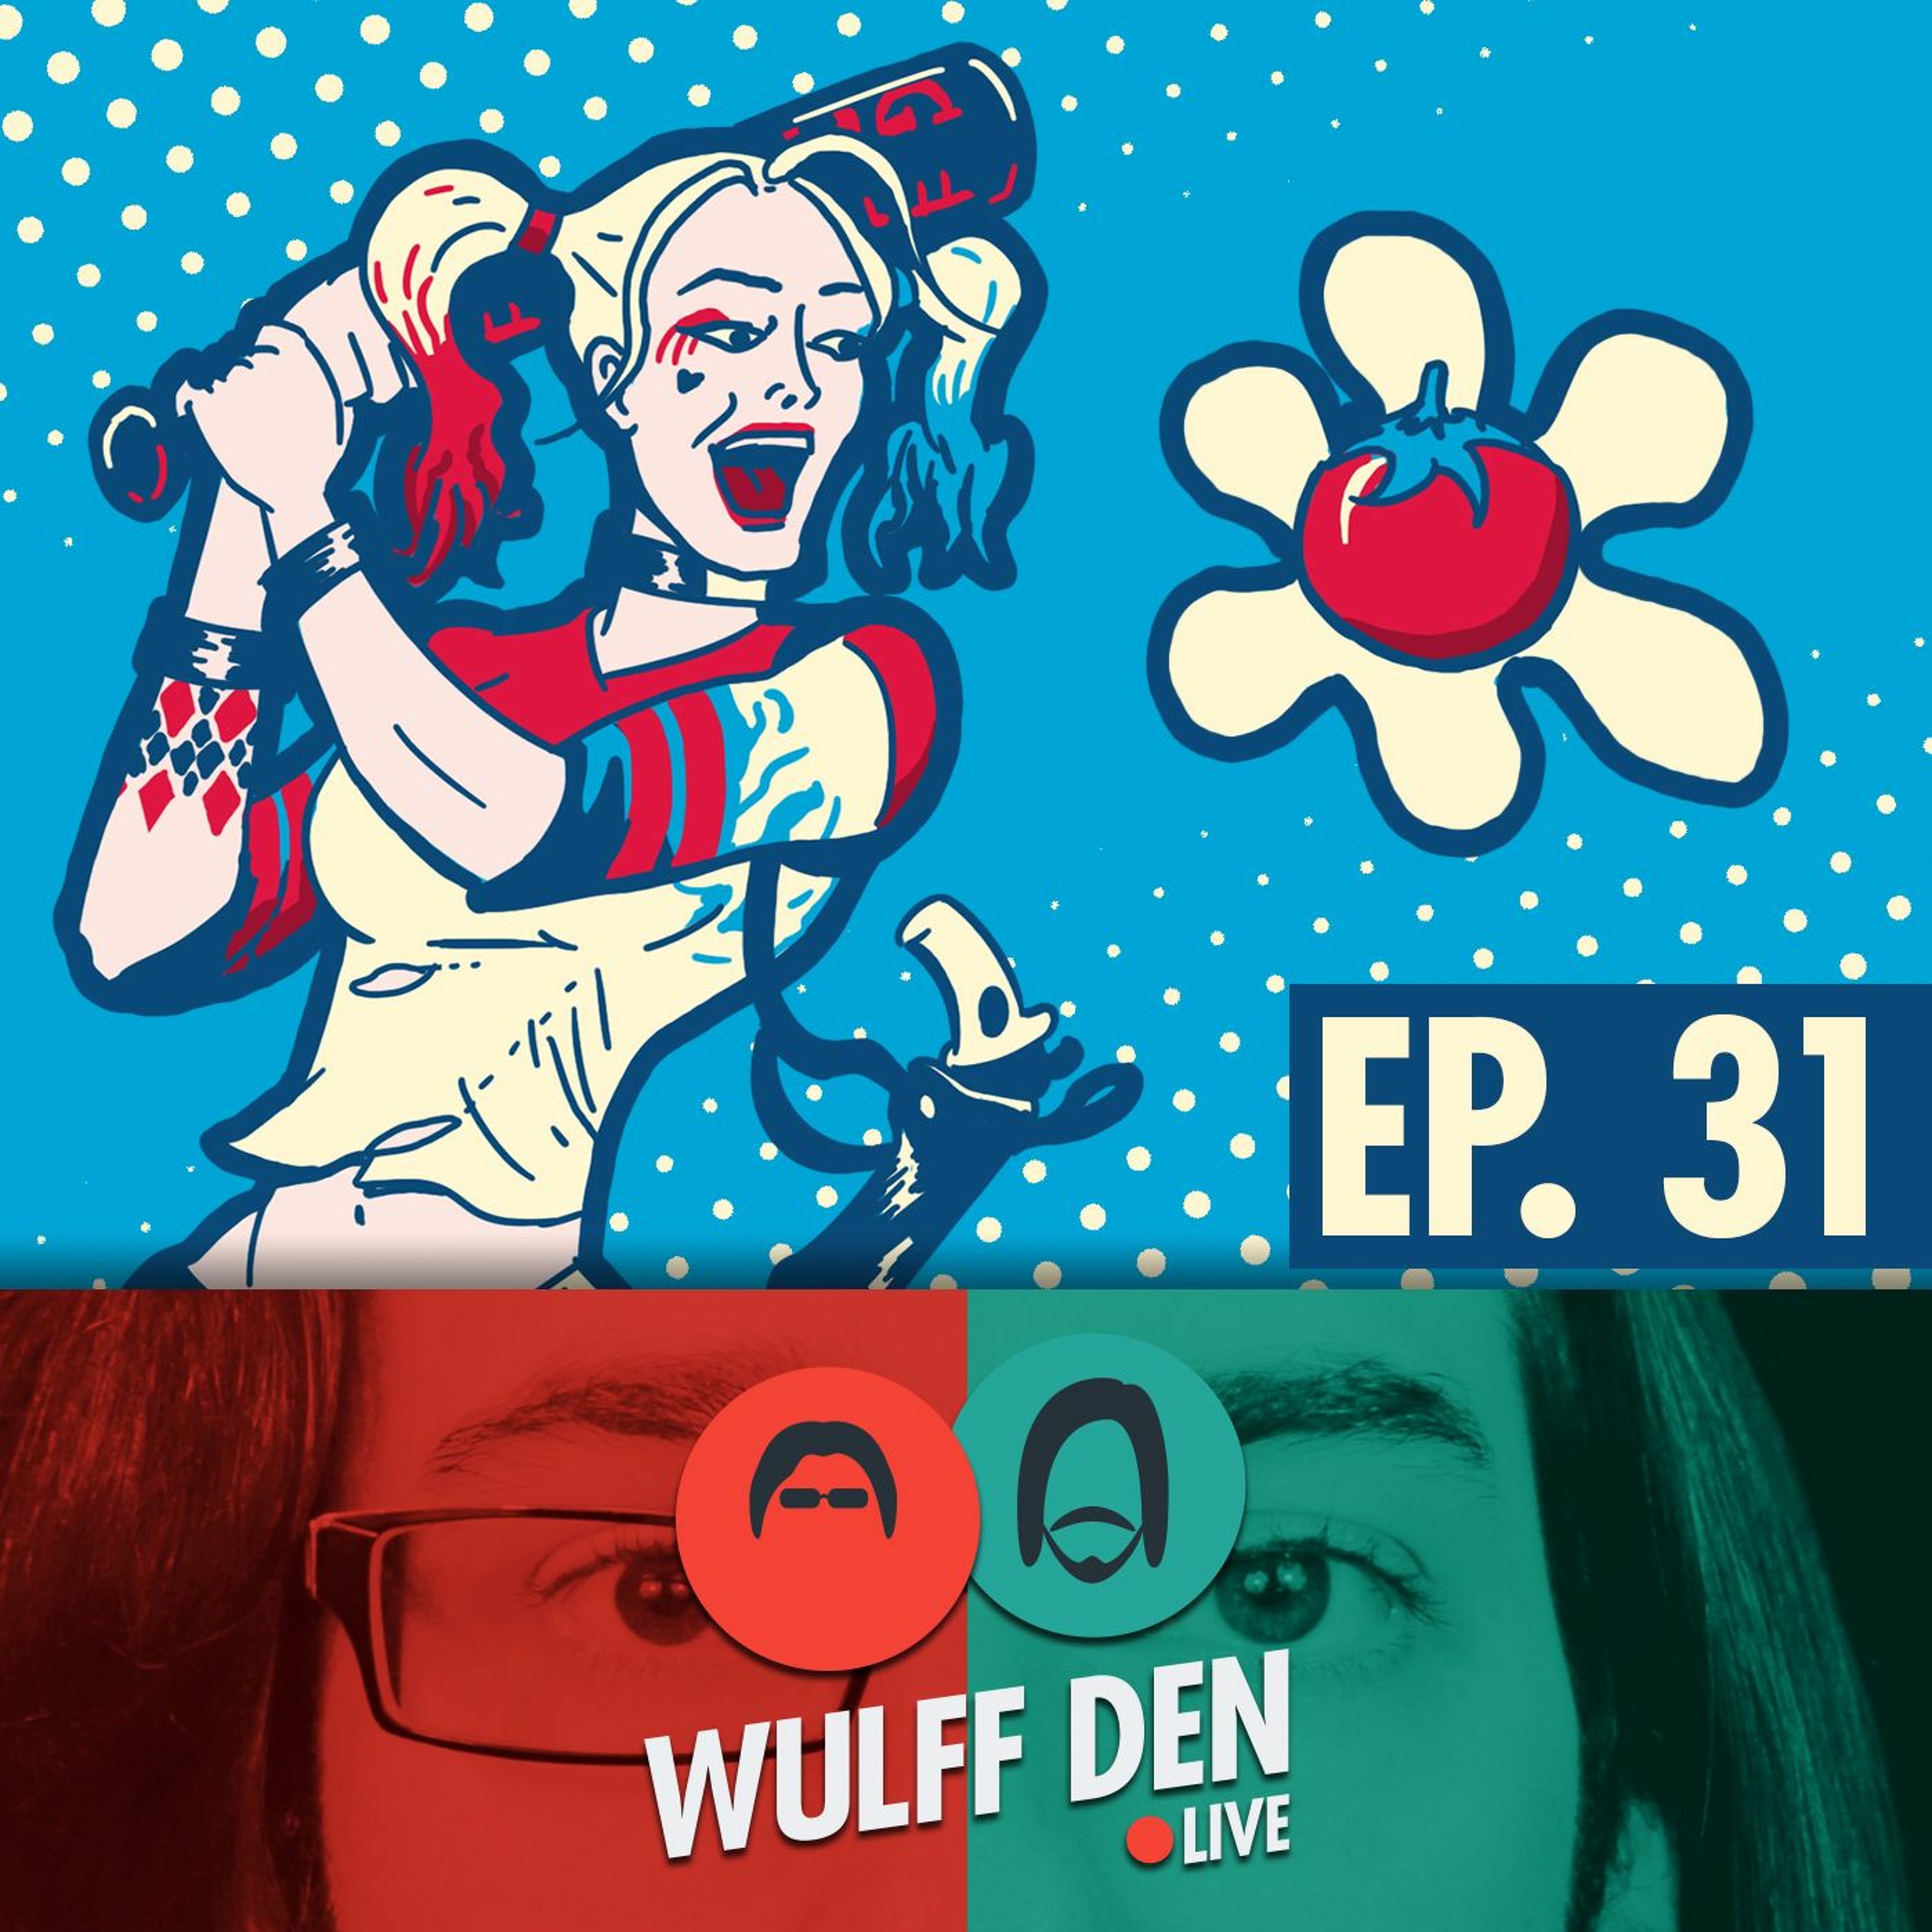 Are You Still Gonna See Suicide Squad? - Wulff Den Live Ep 31